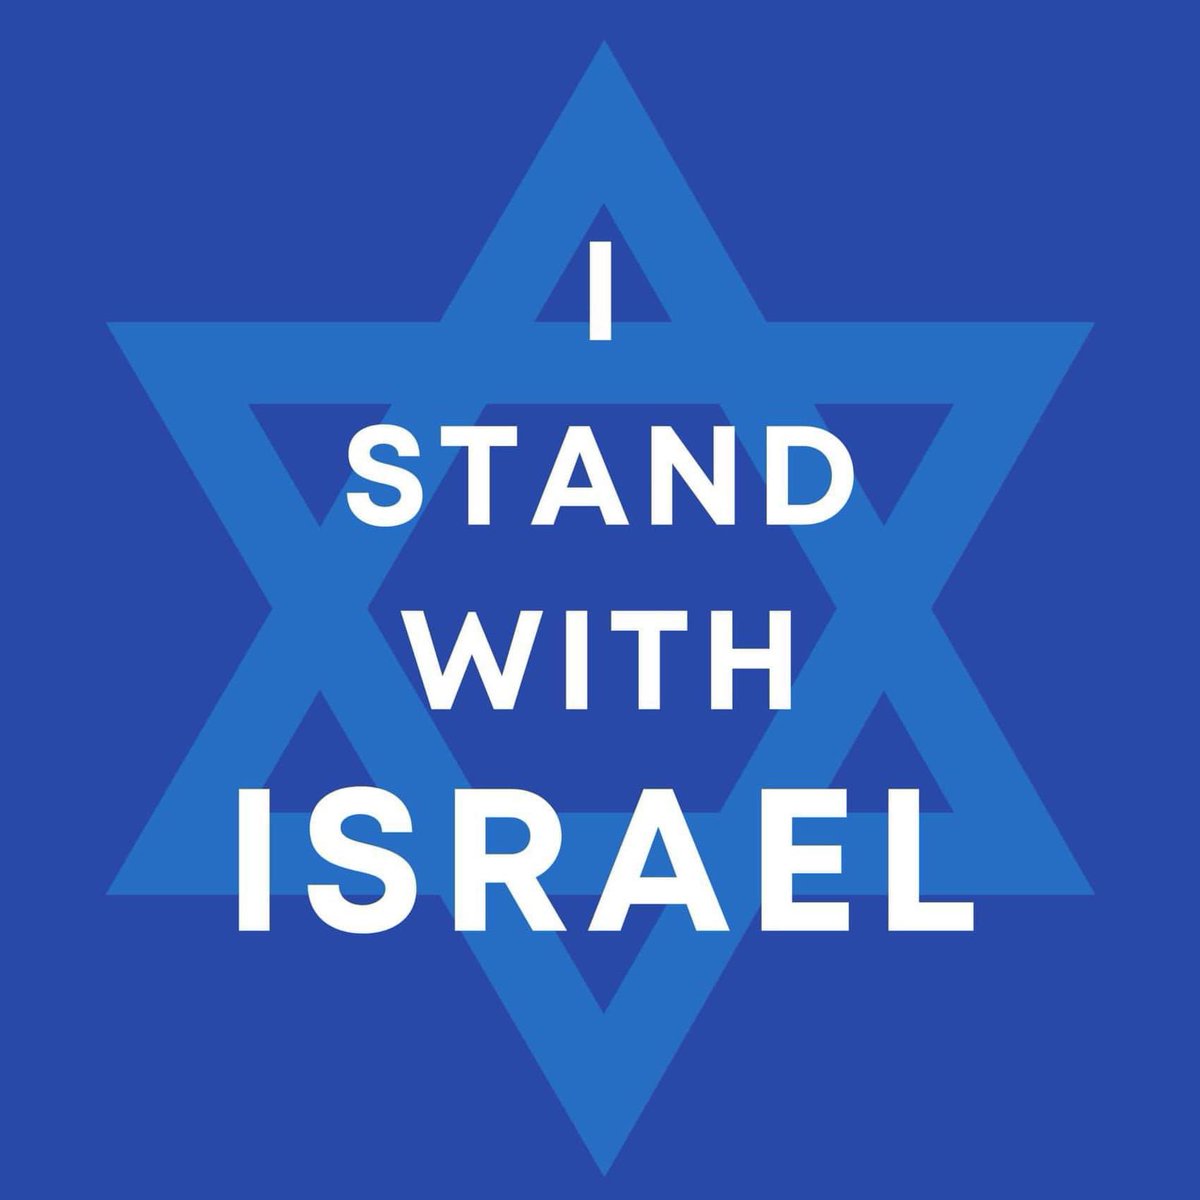 Stand with the people of Israel 🇮🇱💙